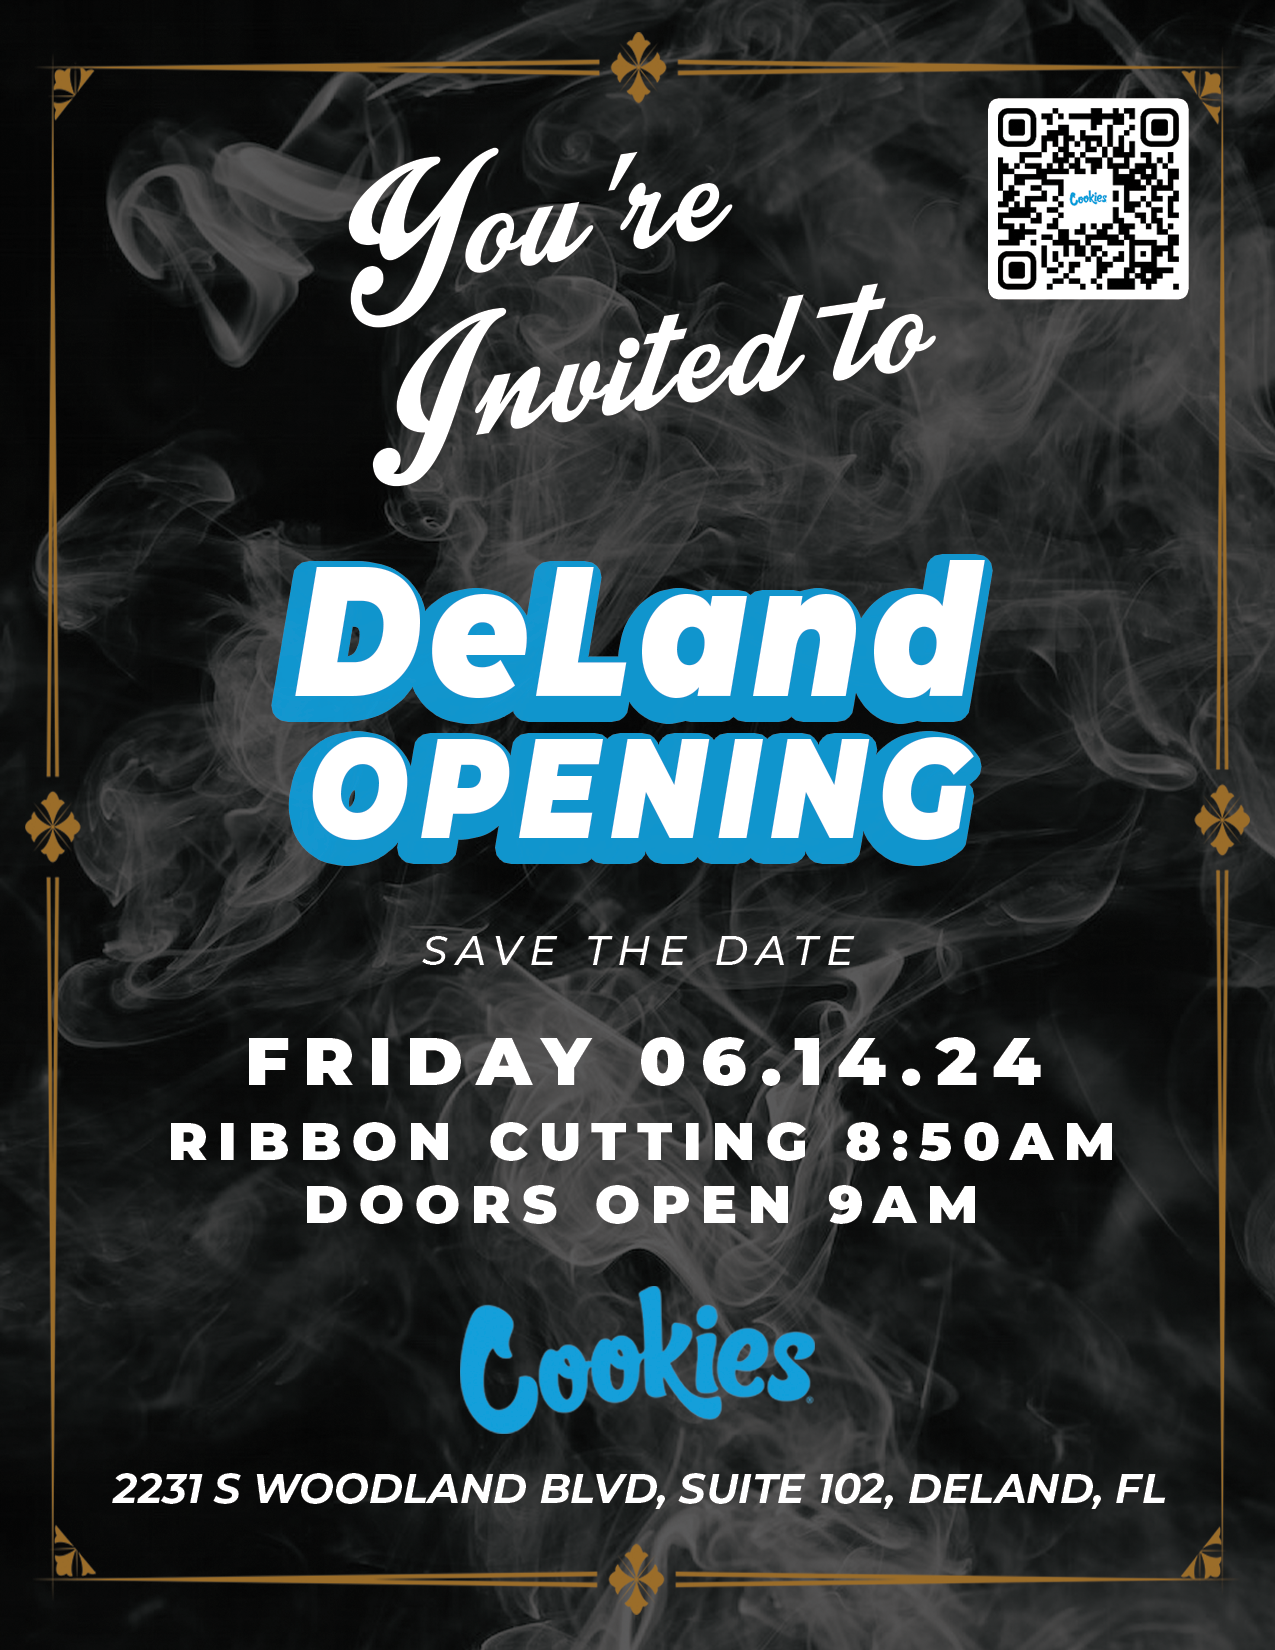 Cookies DeLand Ribbon Cutting Friday 6/14 